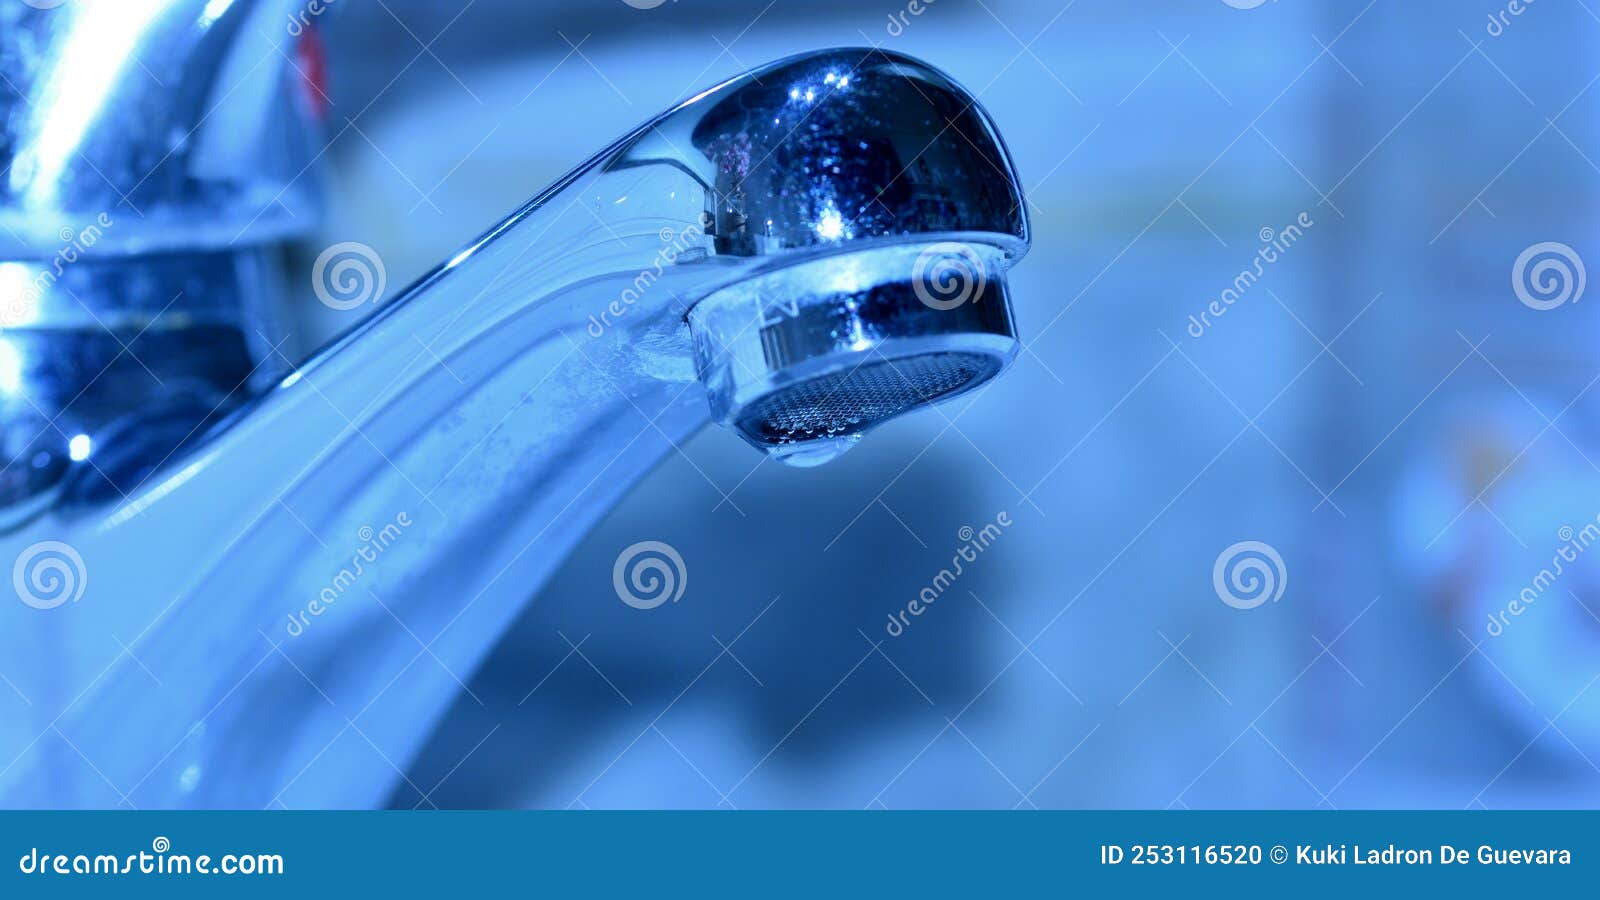 drop of water falling from a faucet